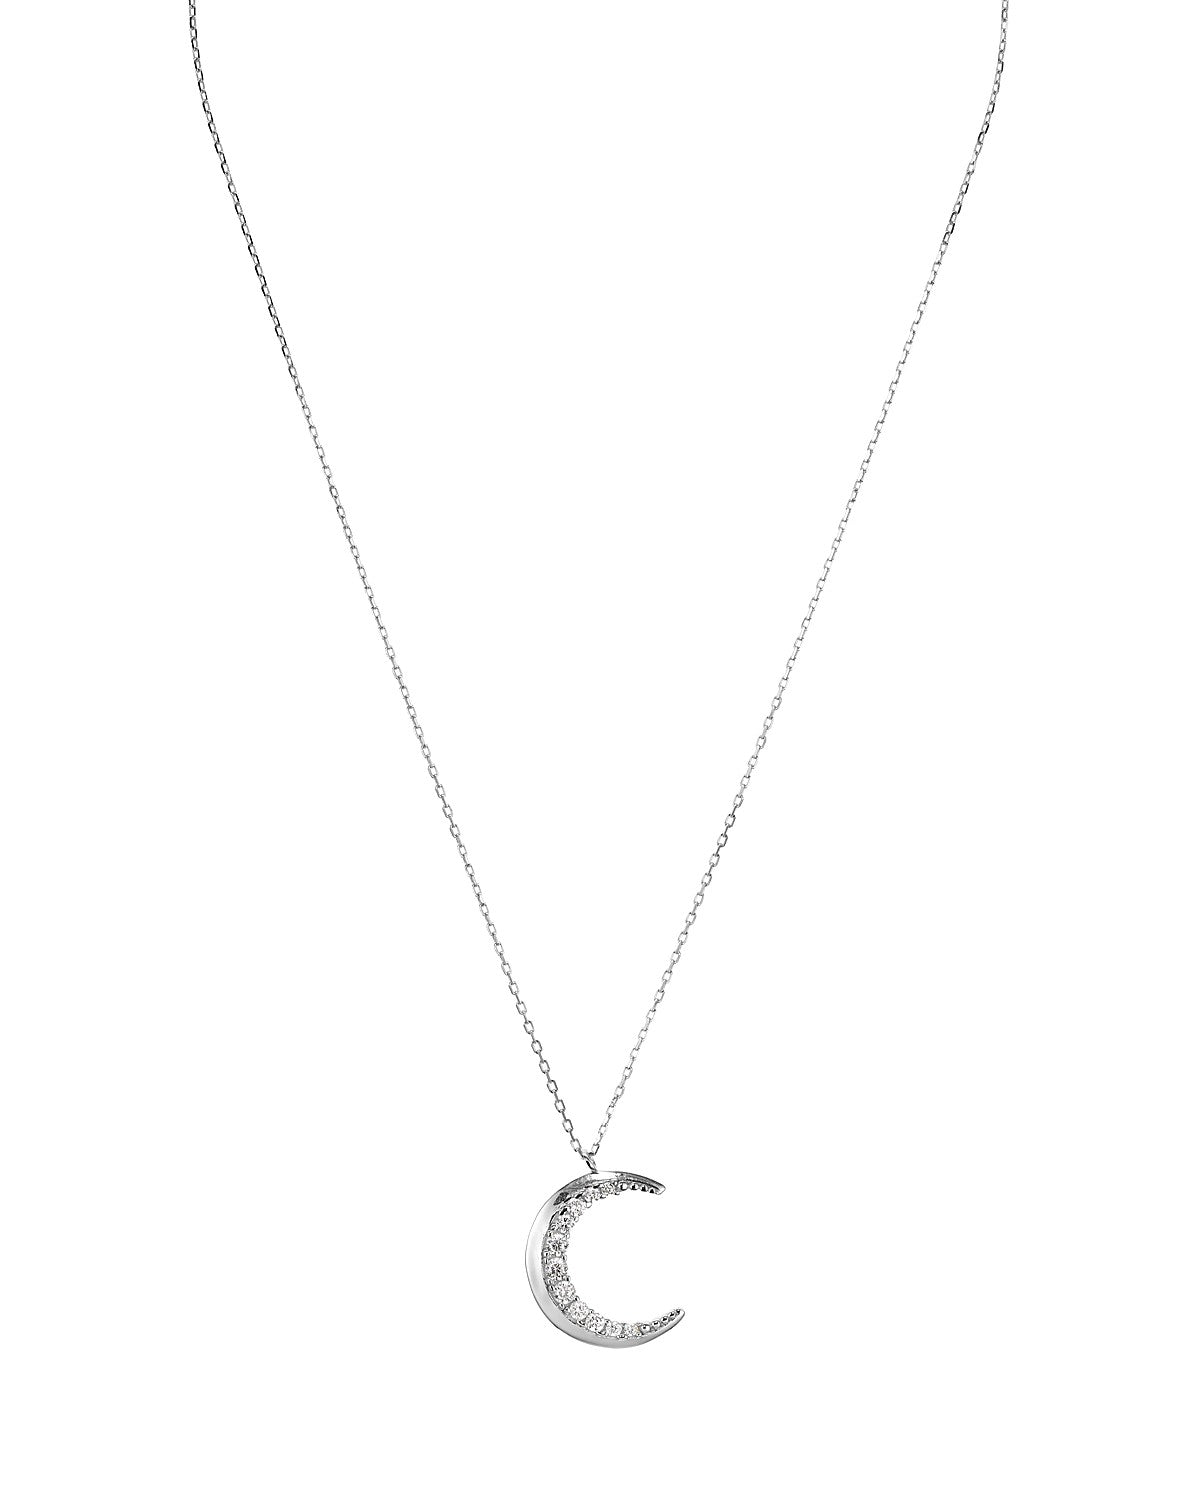 MOON PAVE NECKLACE